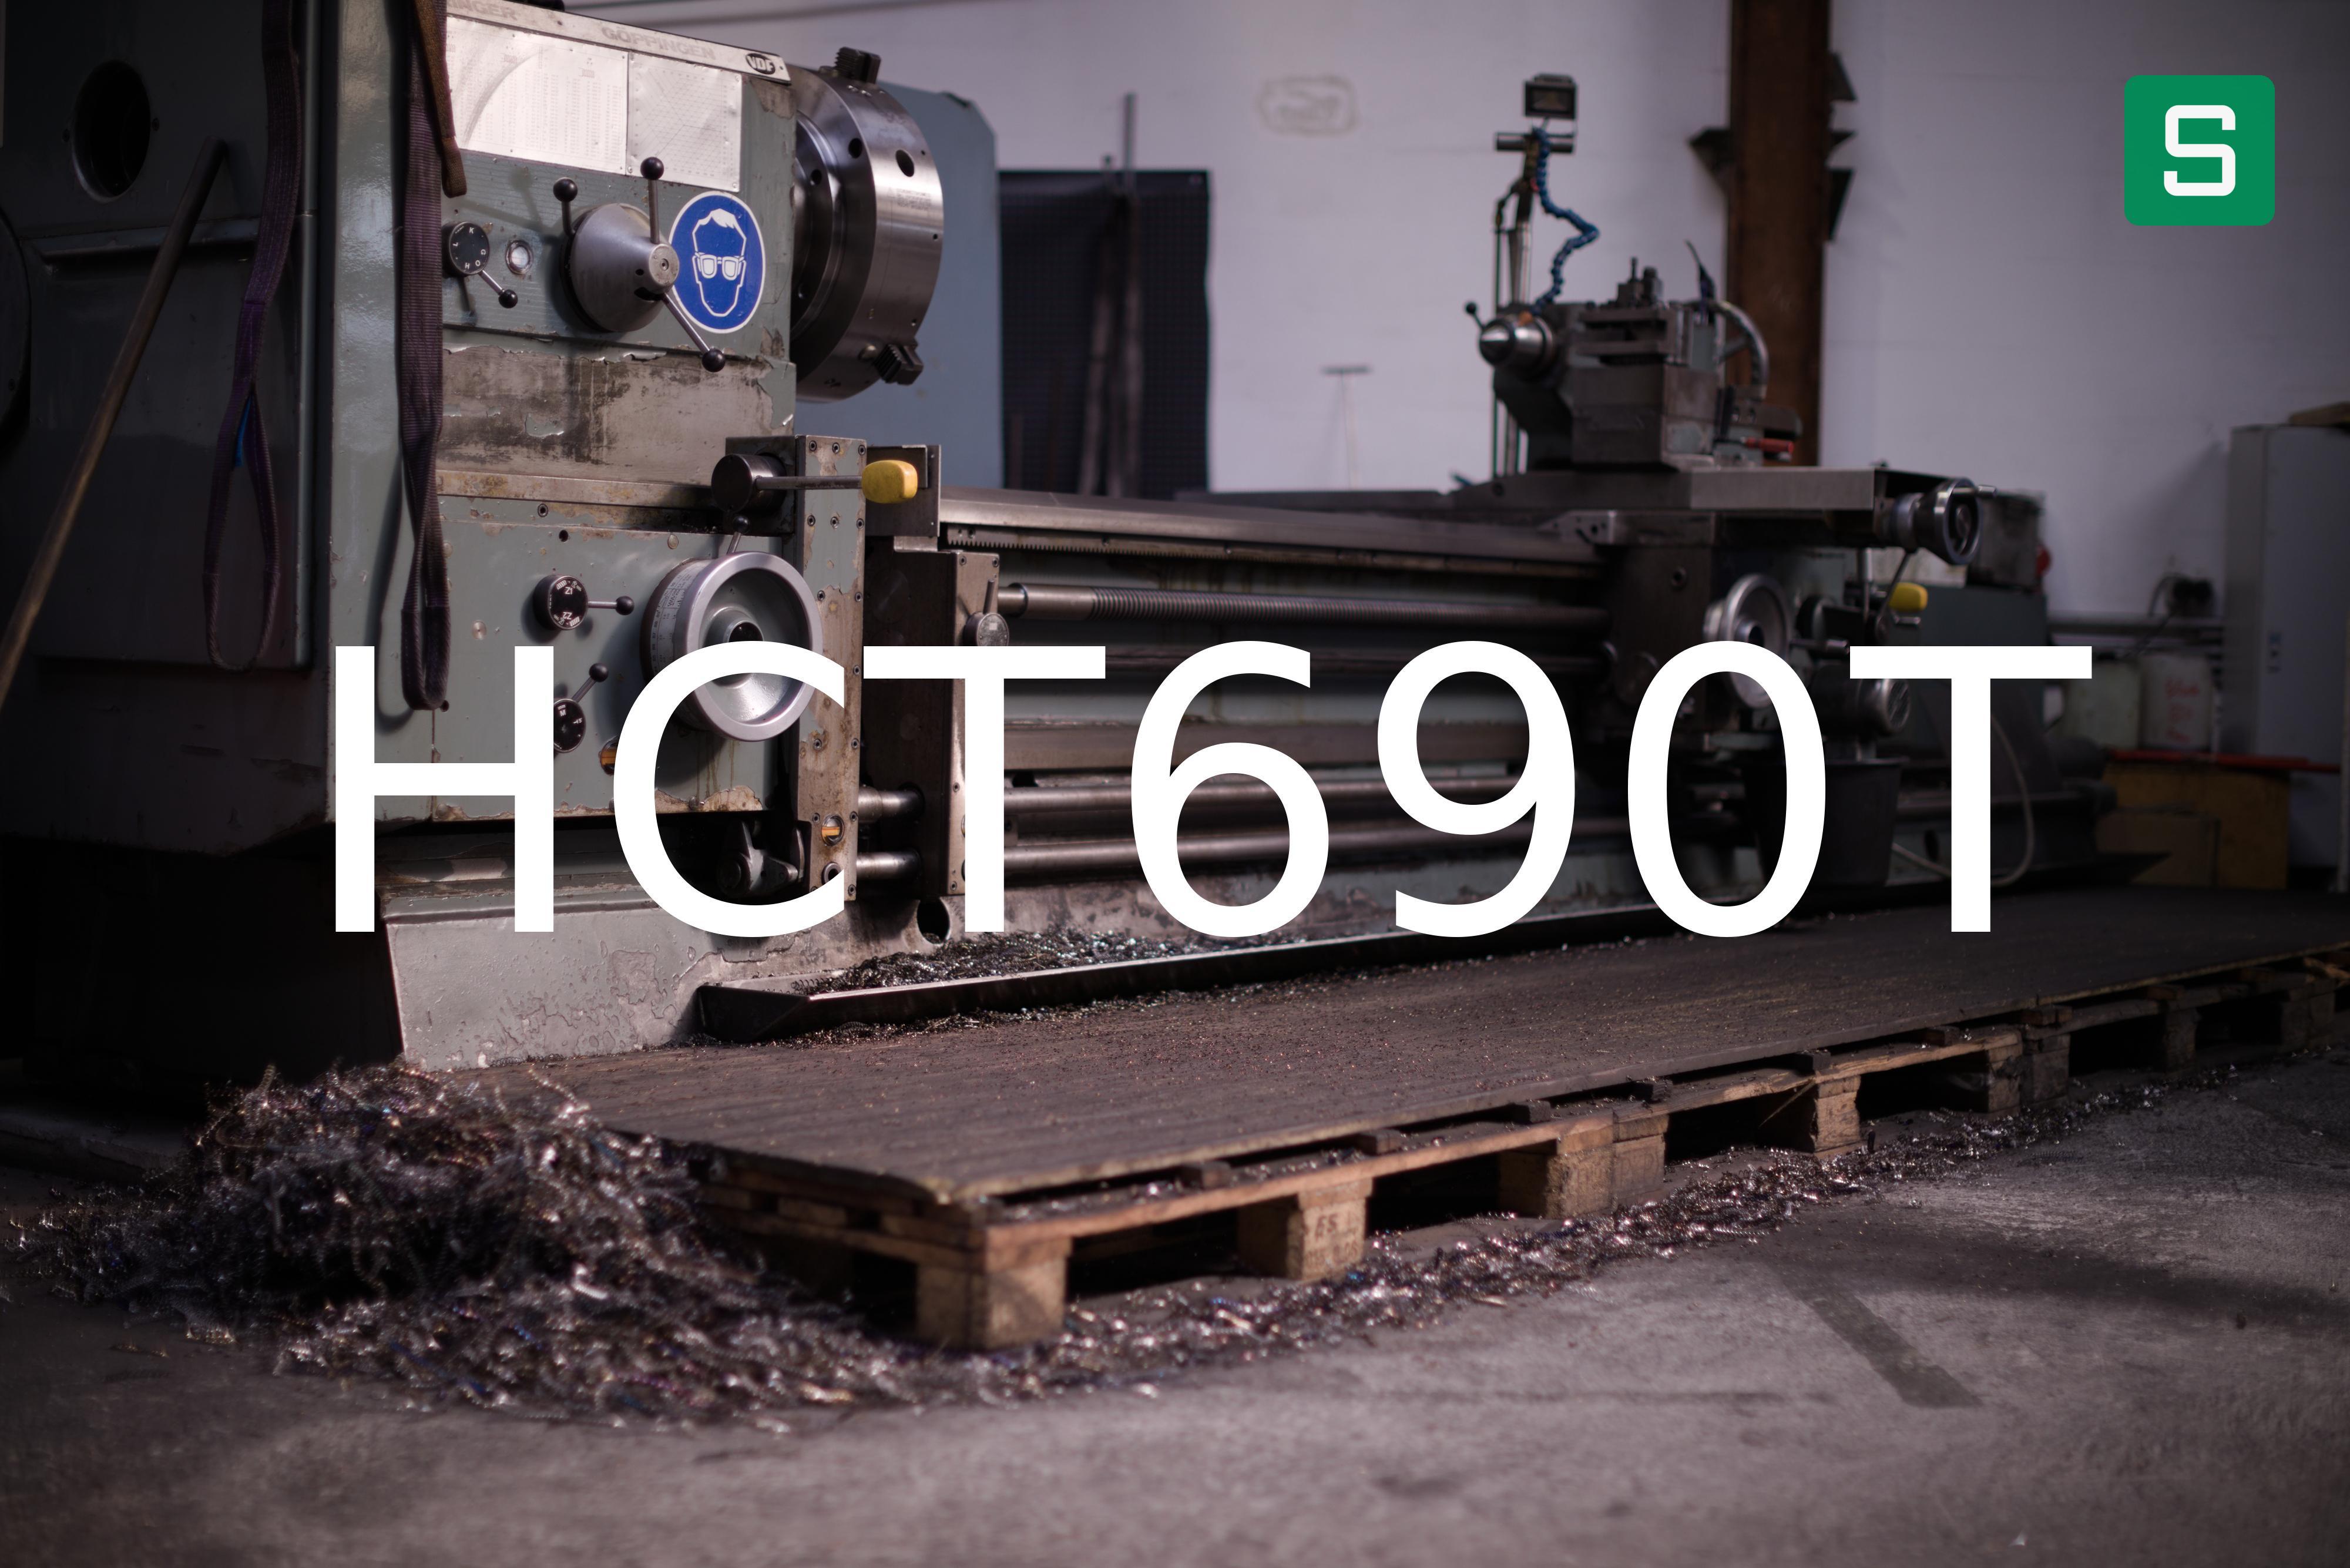 Steel Material: HCT690T